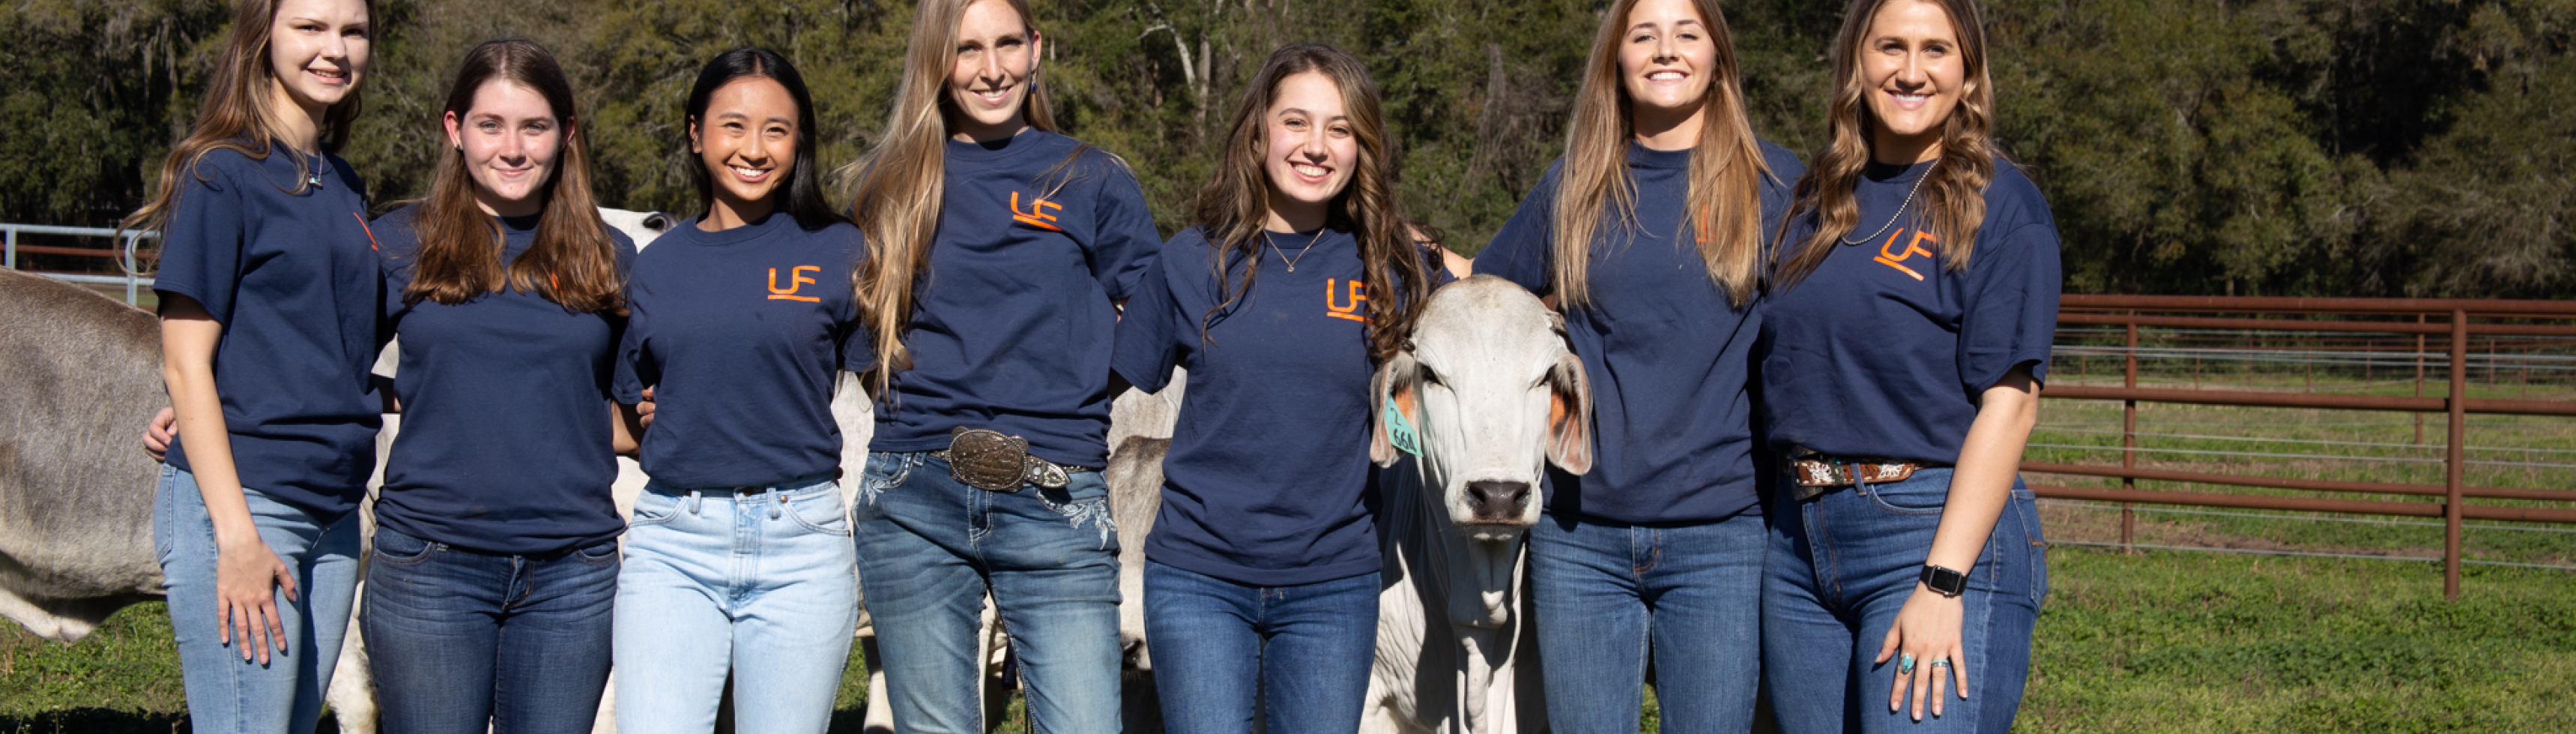 Group of students with brahman cattle in background